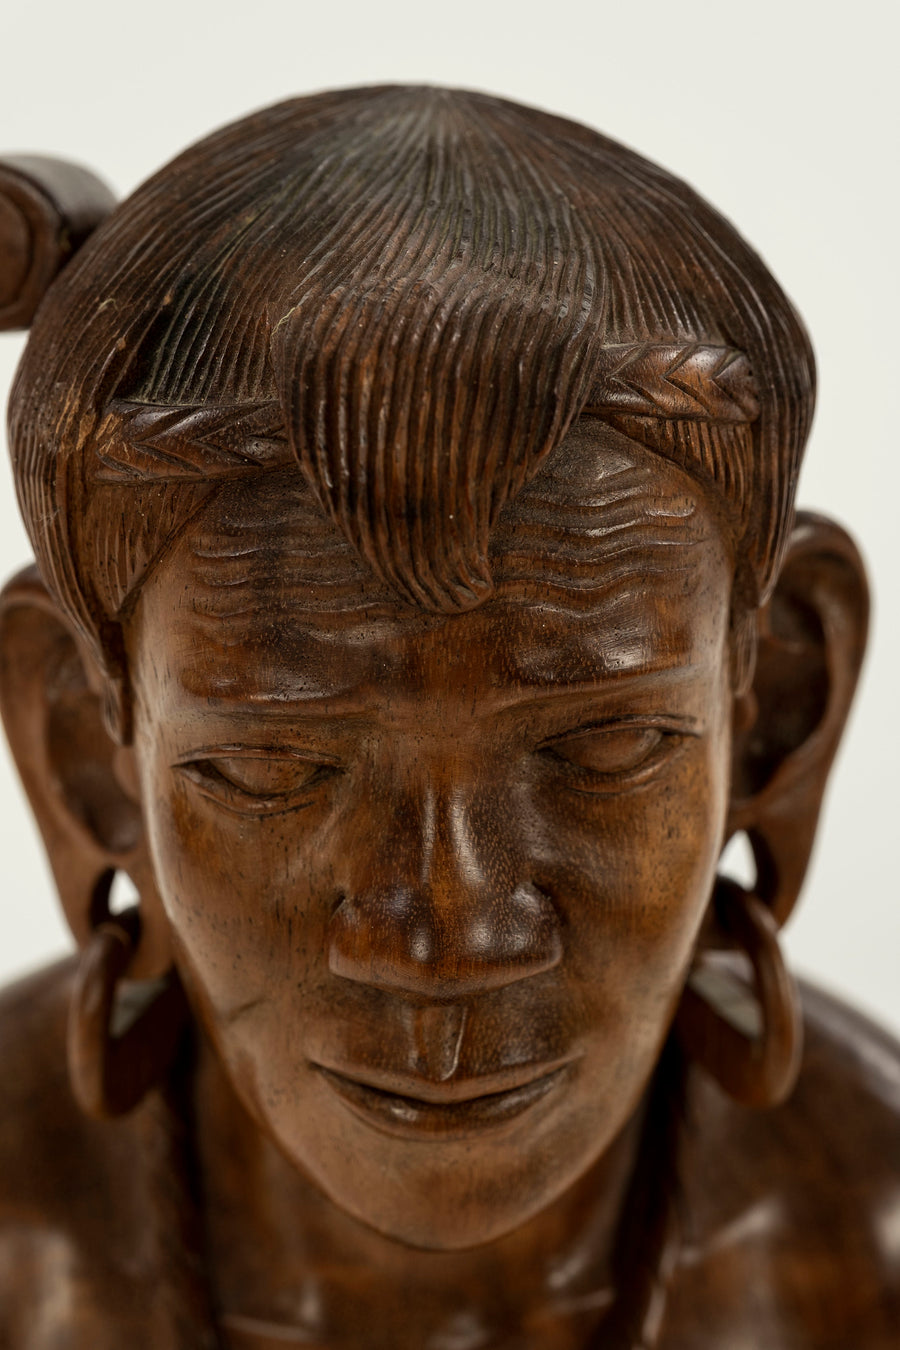 Pair Carved Filipino Tribal Busts